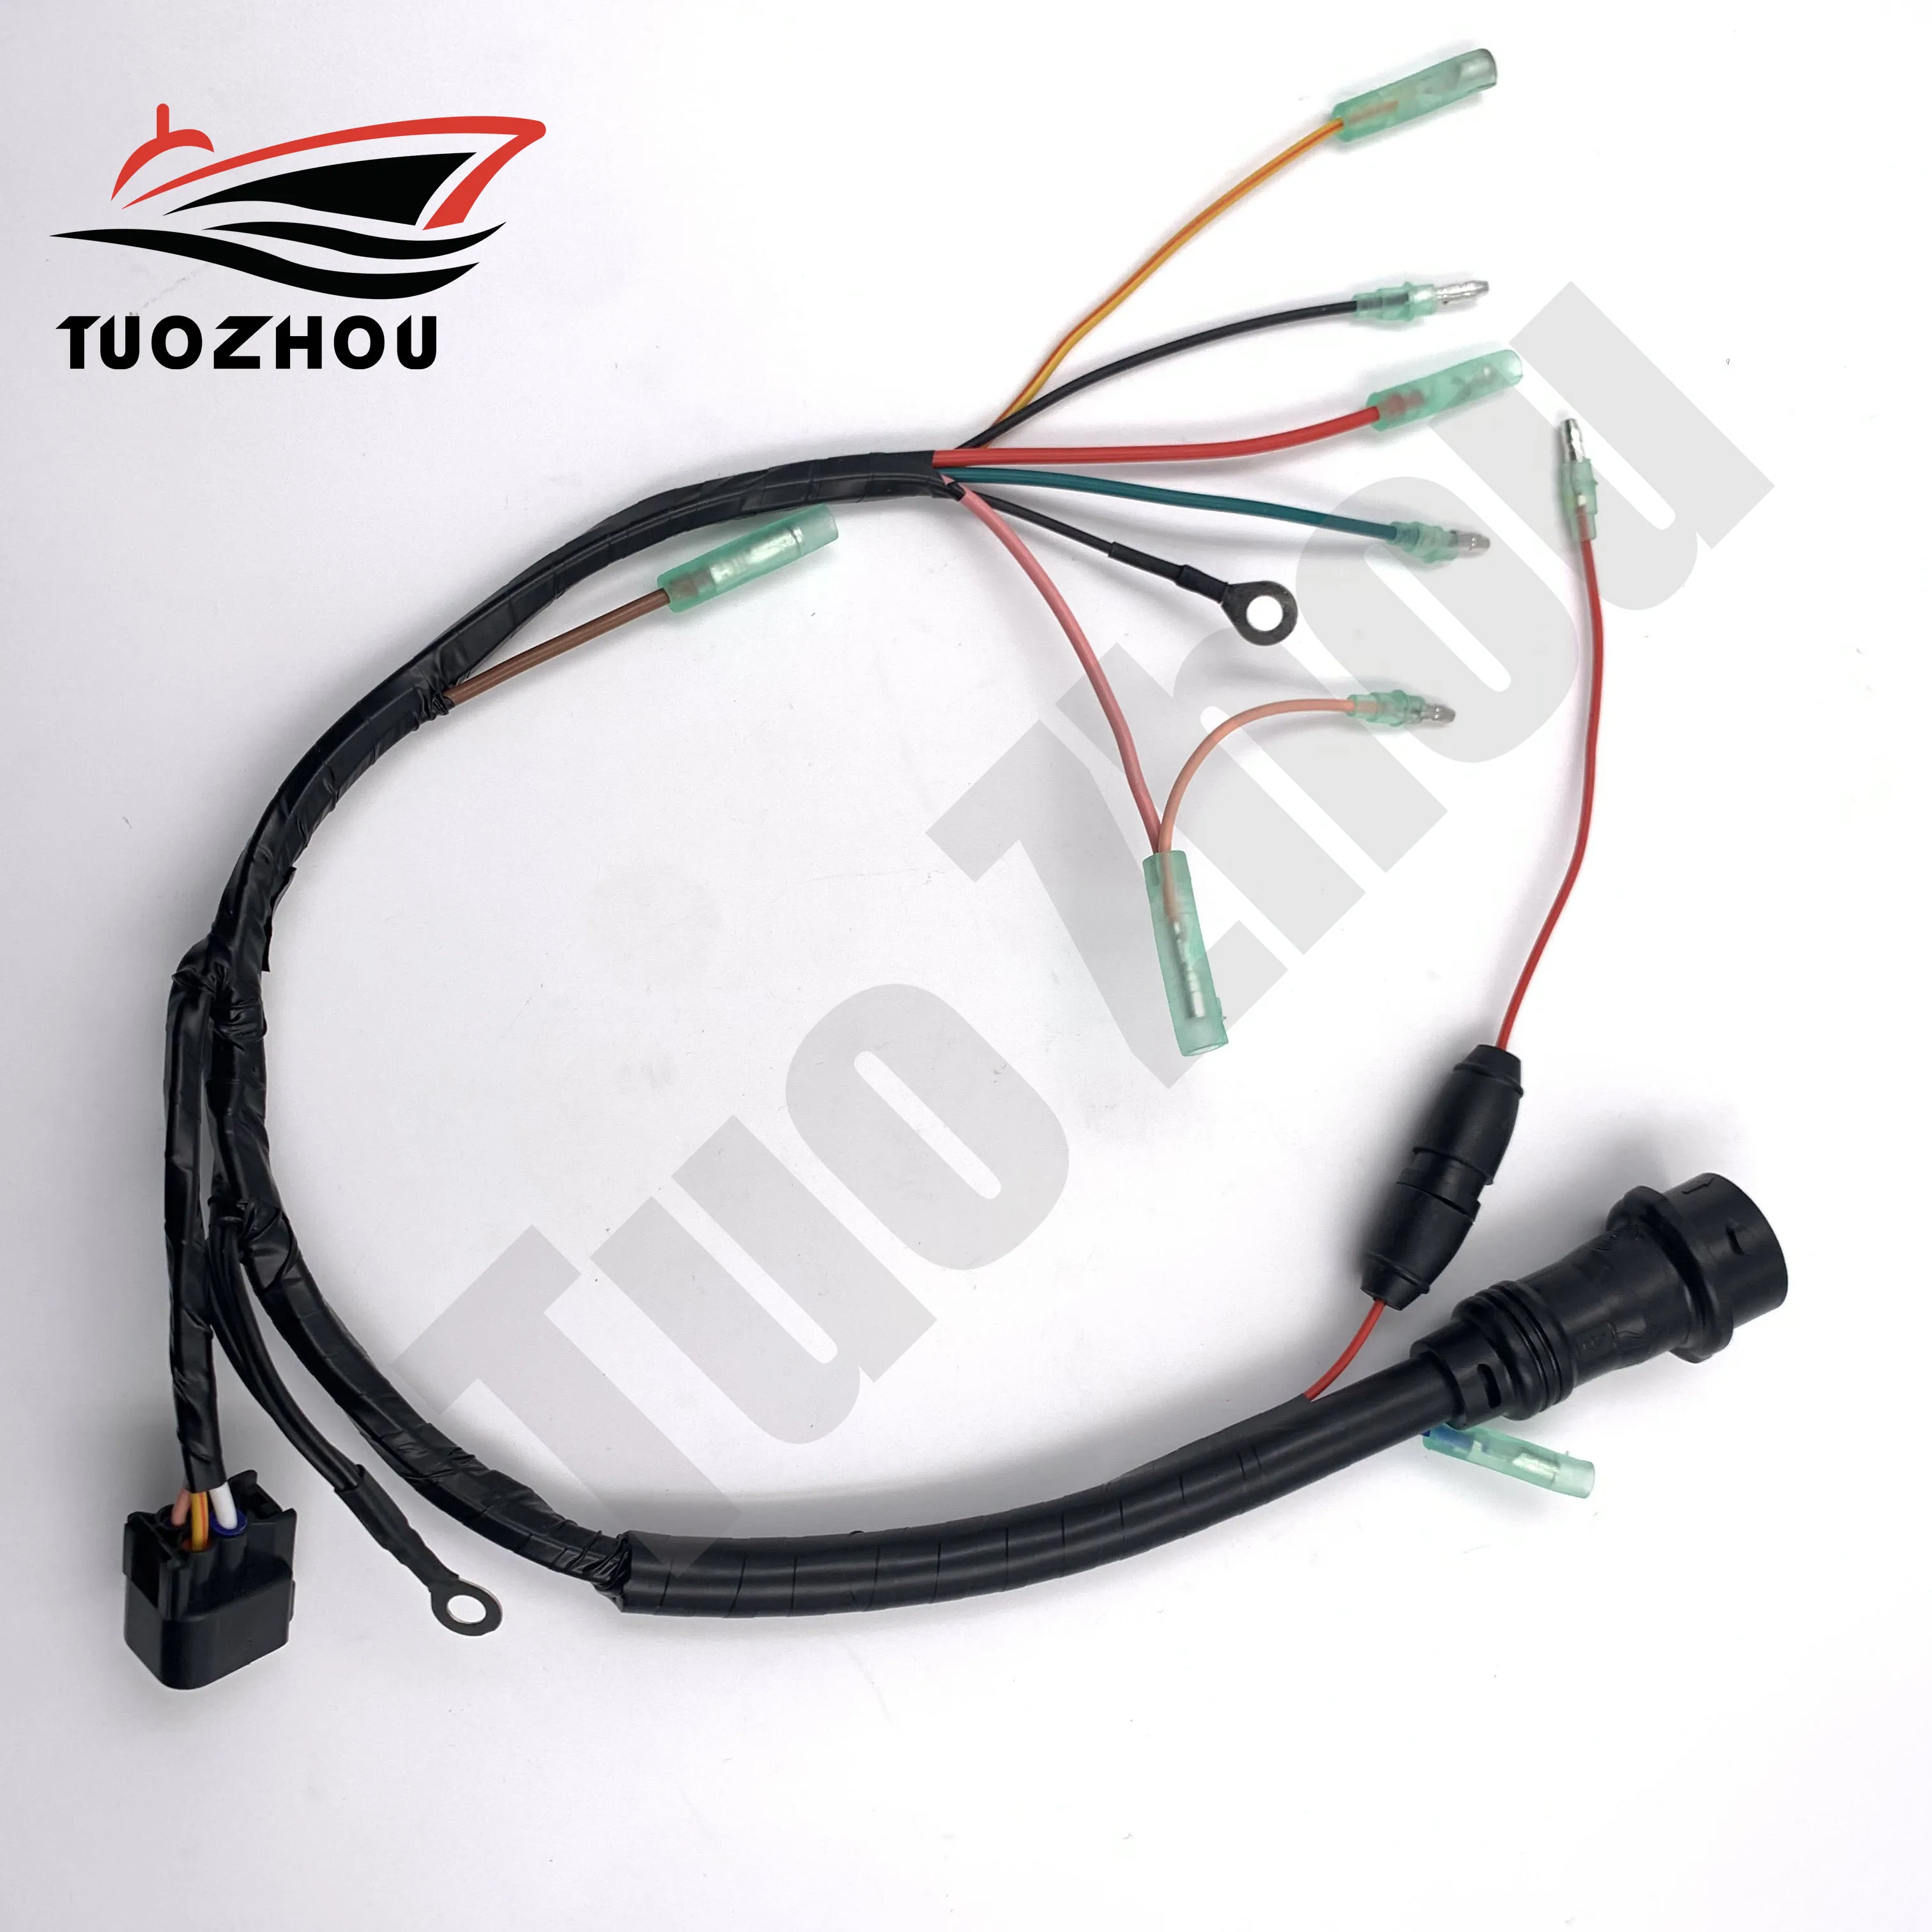 688-82590-04-00 Wire Harness Assy (7P) for yamaha outboard 2T 75HP 85HP 688-82590-04 688-82590 boat engine parts